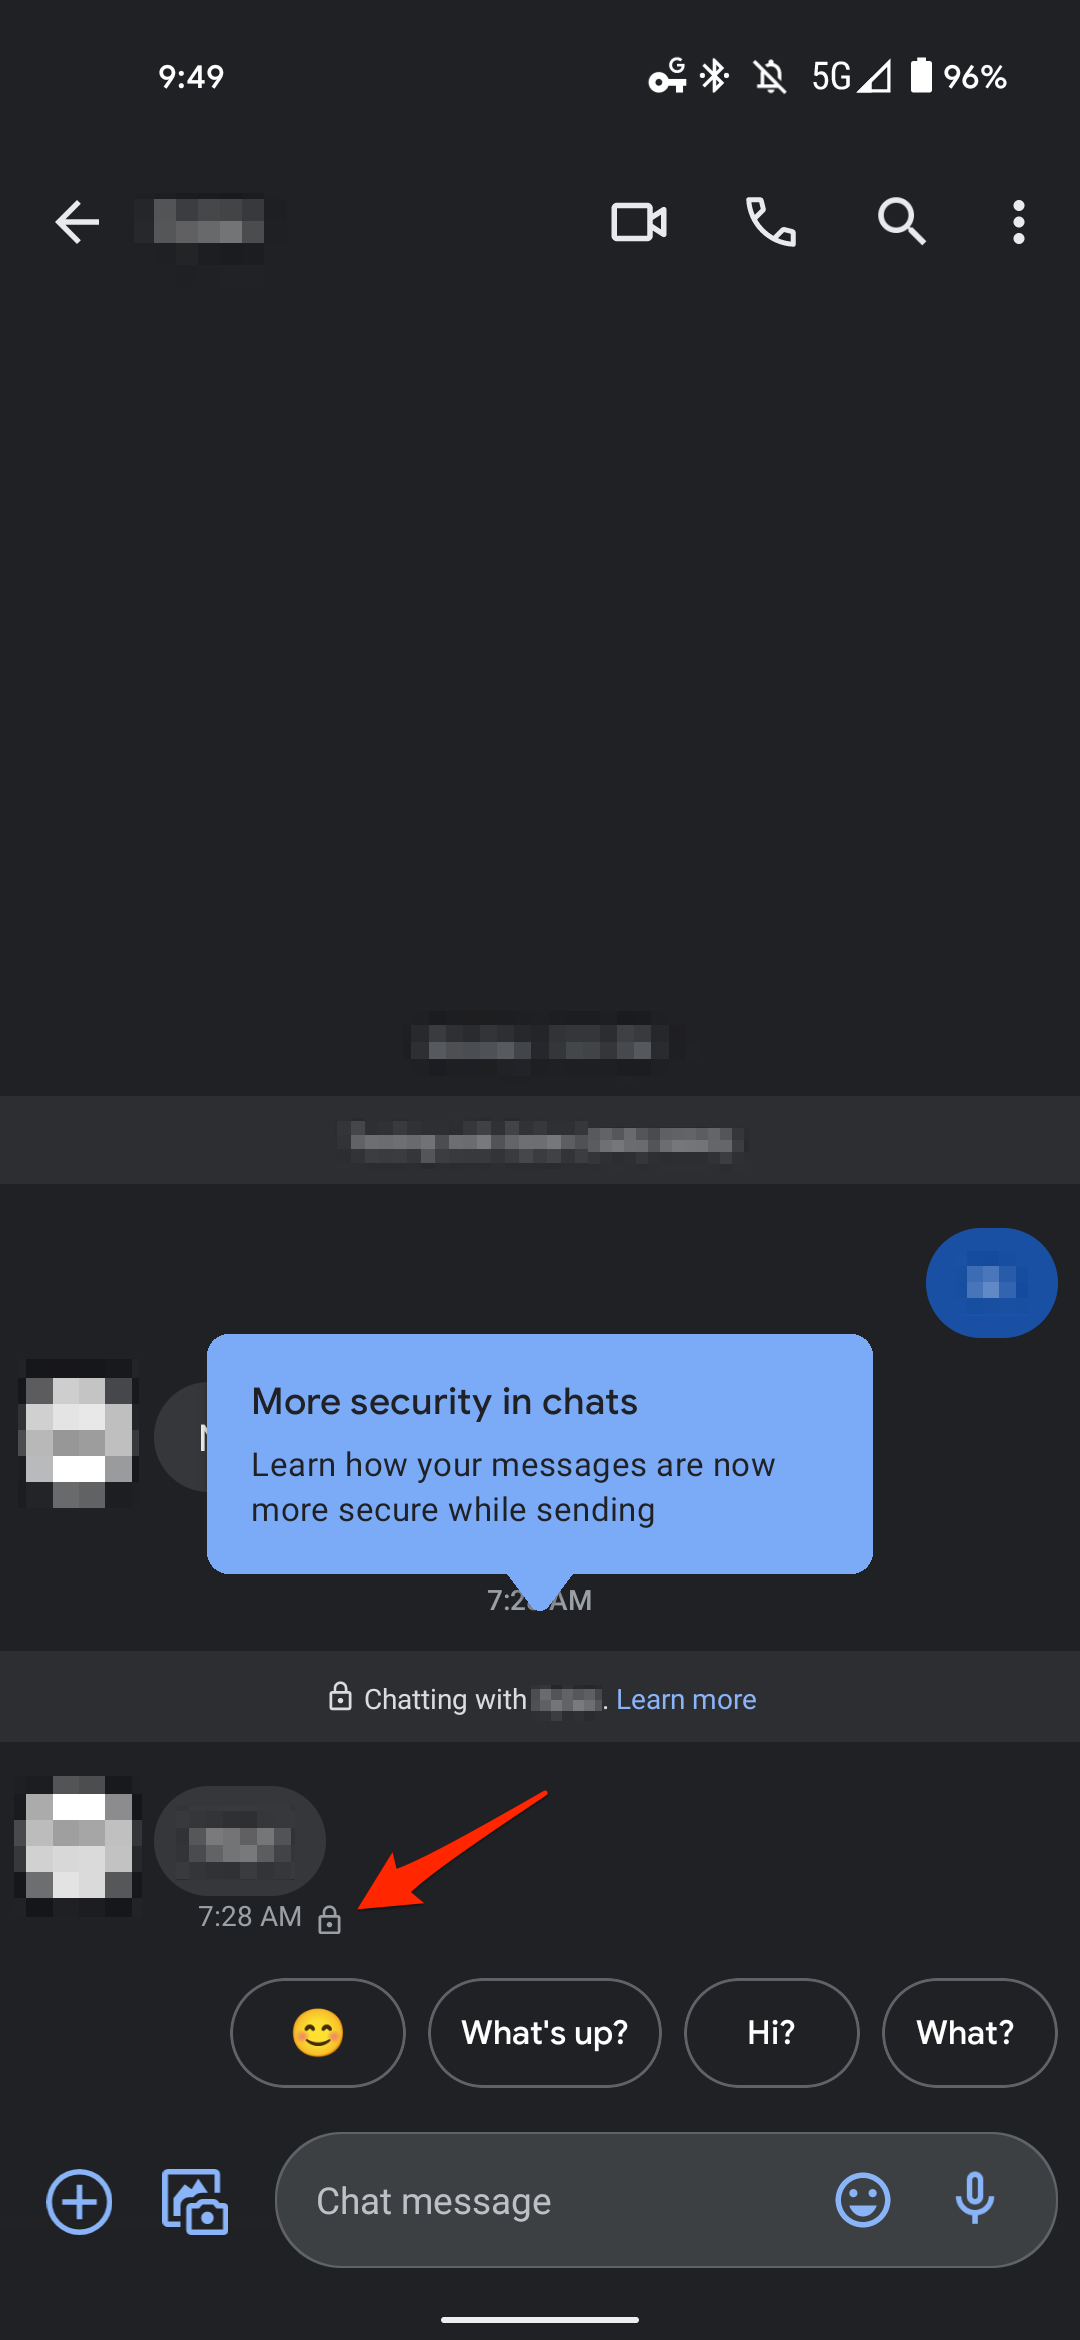 Verify whether there’s a small lock icon under your messages